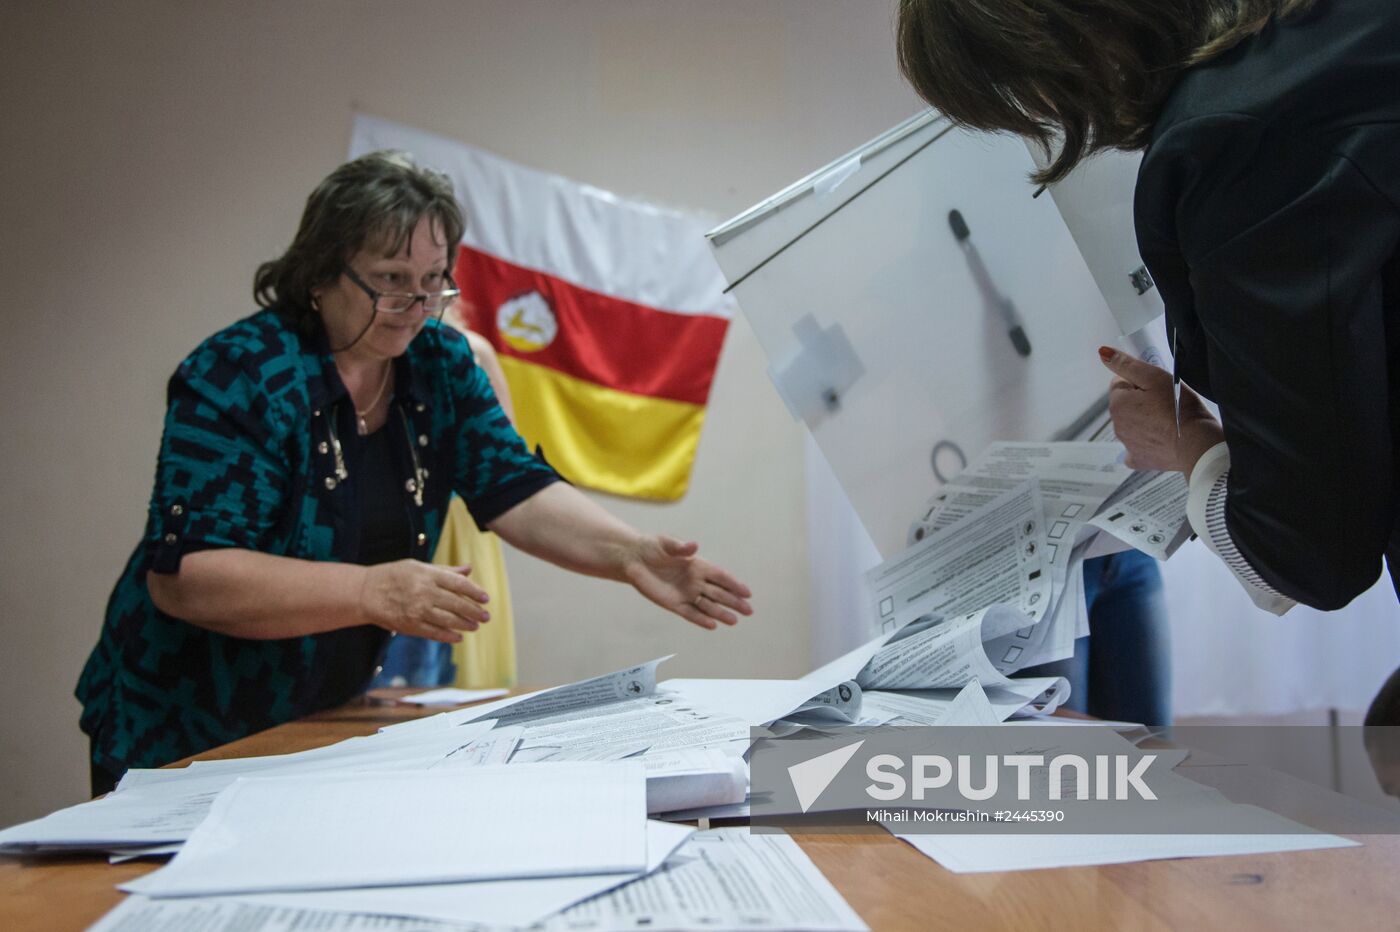 Counting ballots following parliamentary elections in South Ossetia